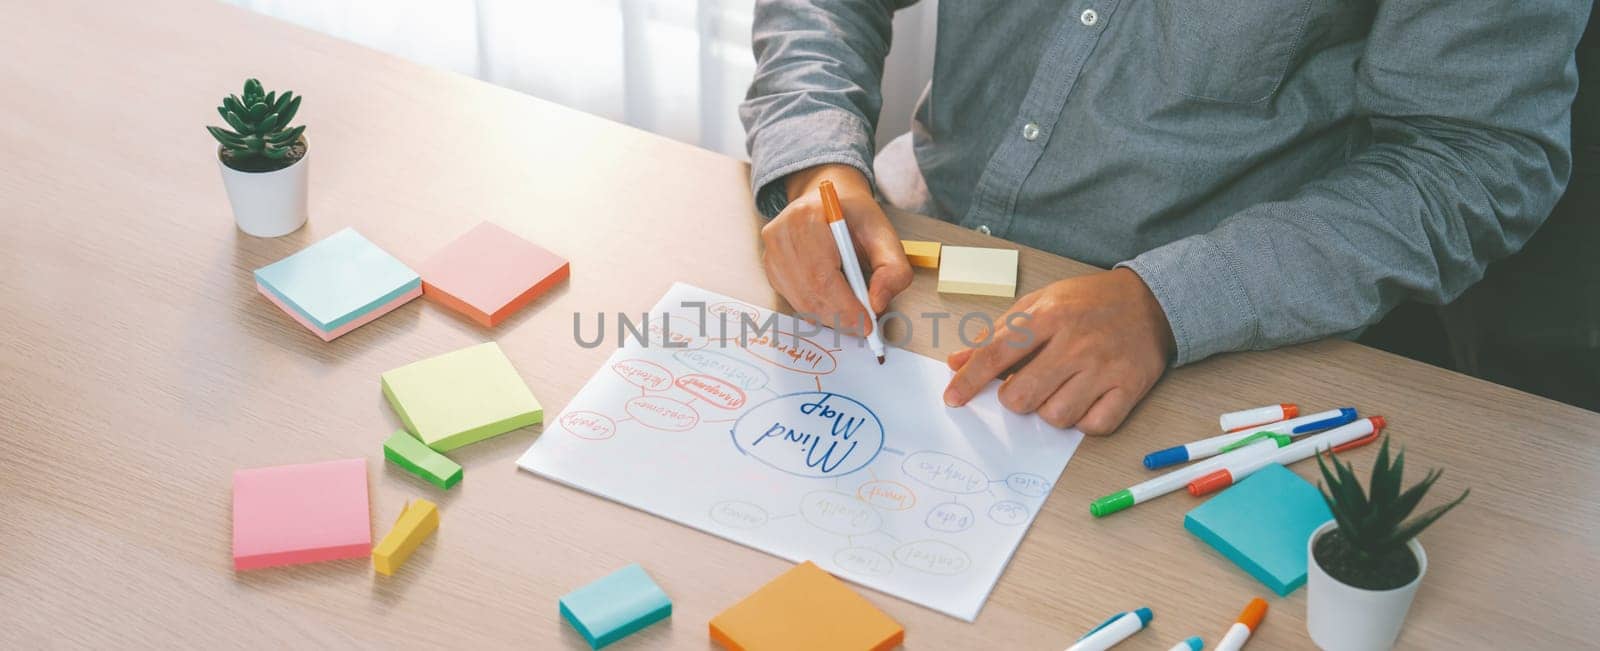 Skilled businessman brainstorms marketing ideas using mind maps. Successful male startup leader drafts financial plan on table with sticky notes scatter around. Closeup. Focus on hand.Variegated.